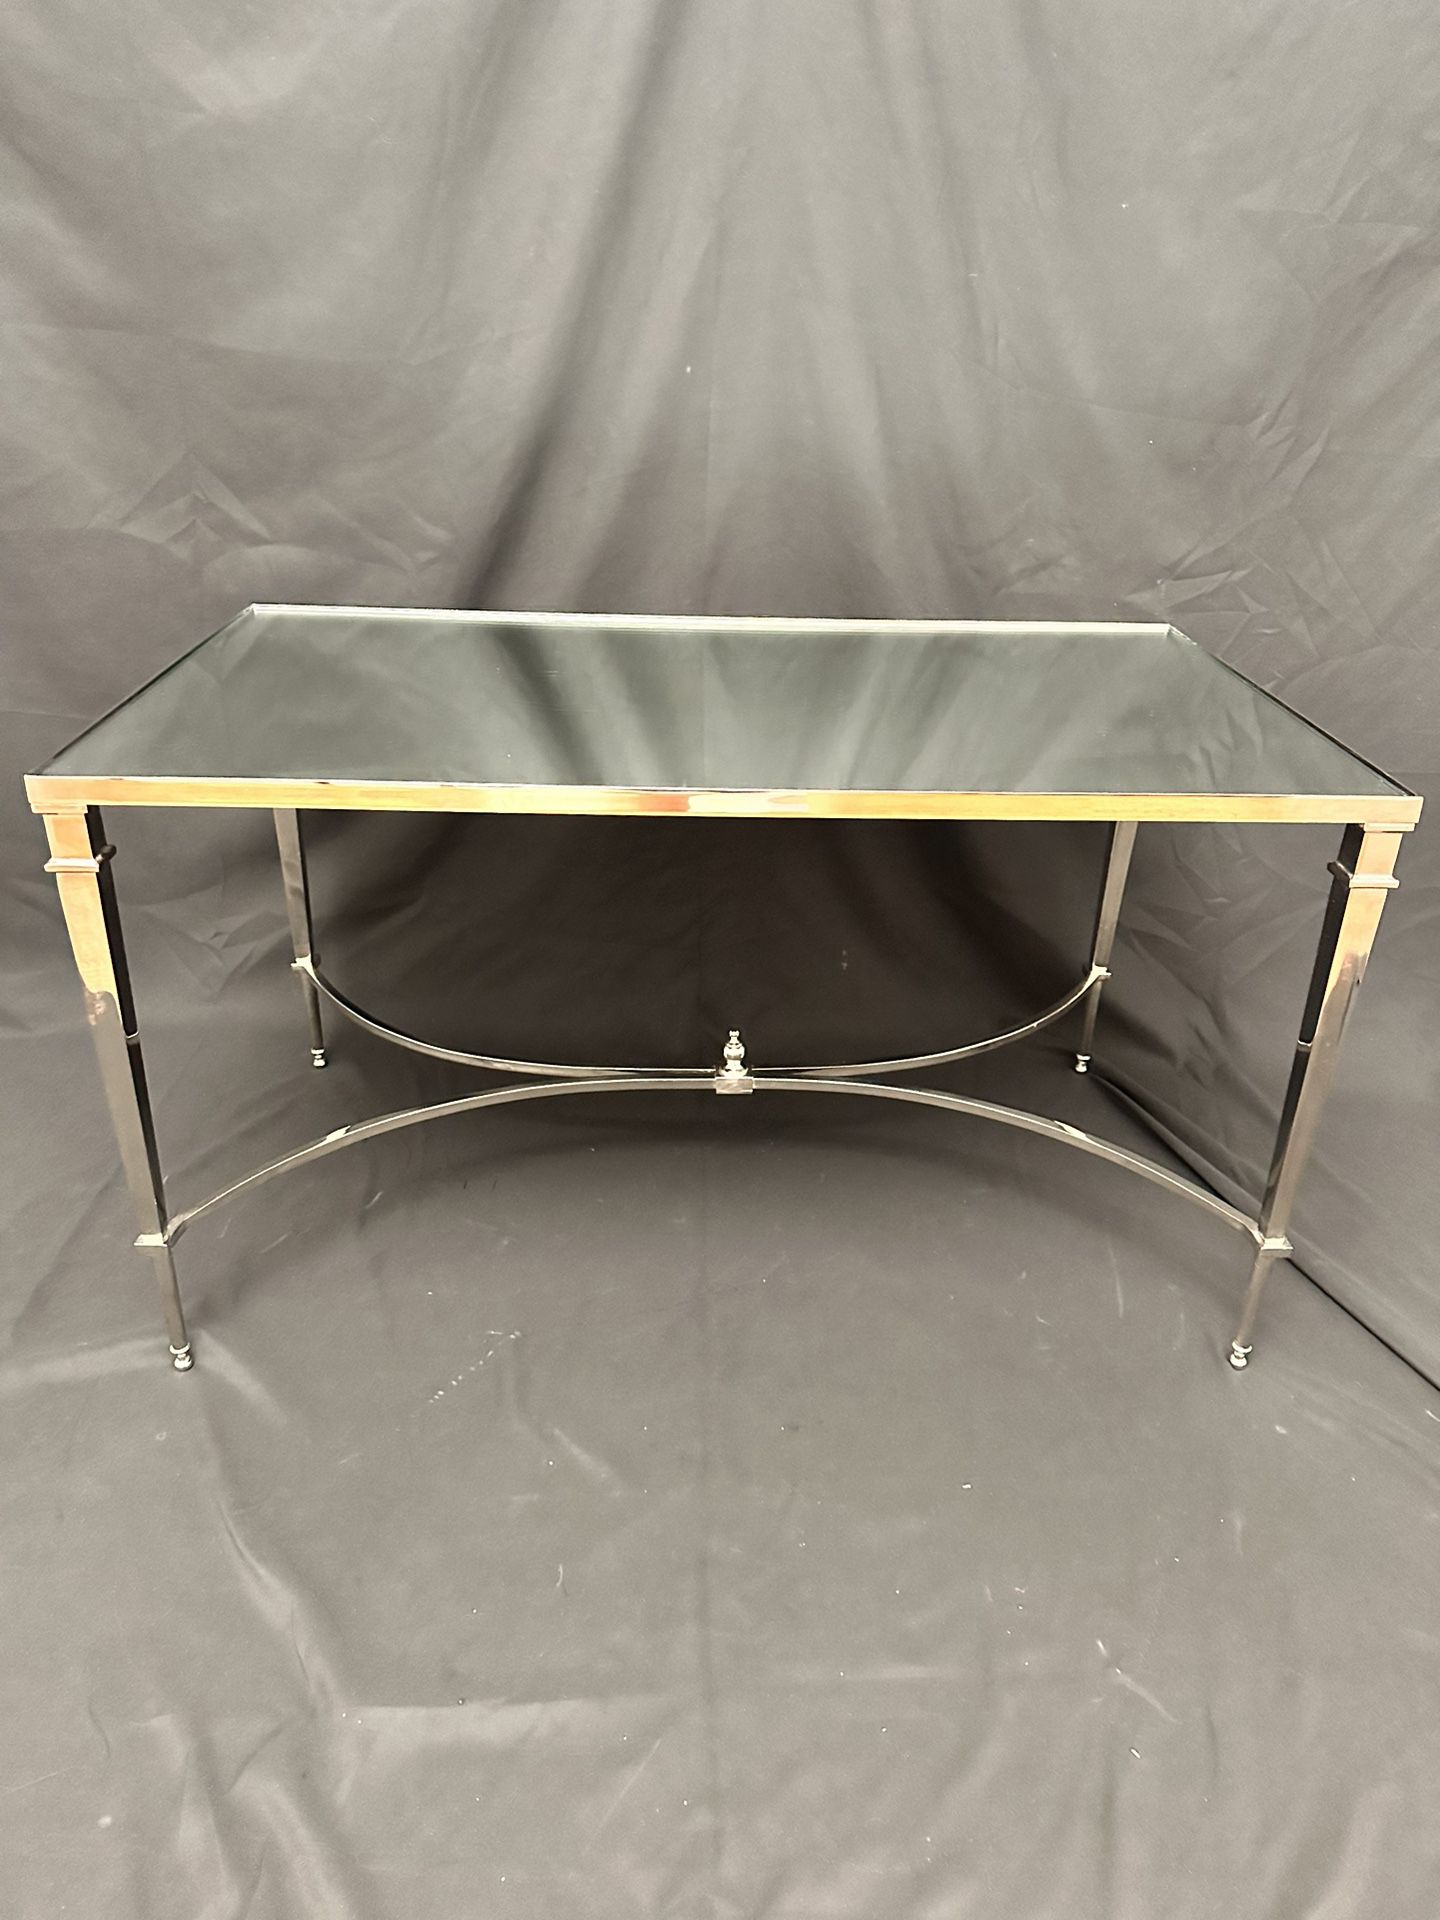 FRENCH SQUARE LEG COCKTAIL TABLE- NICKEL WITH MIRROR- EXCELLENT CONDITION!